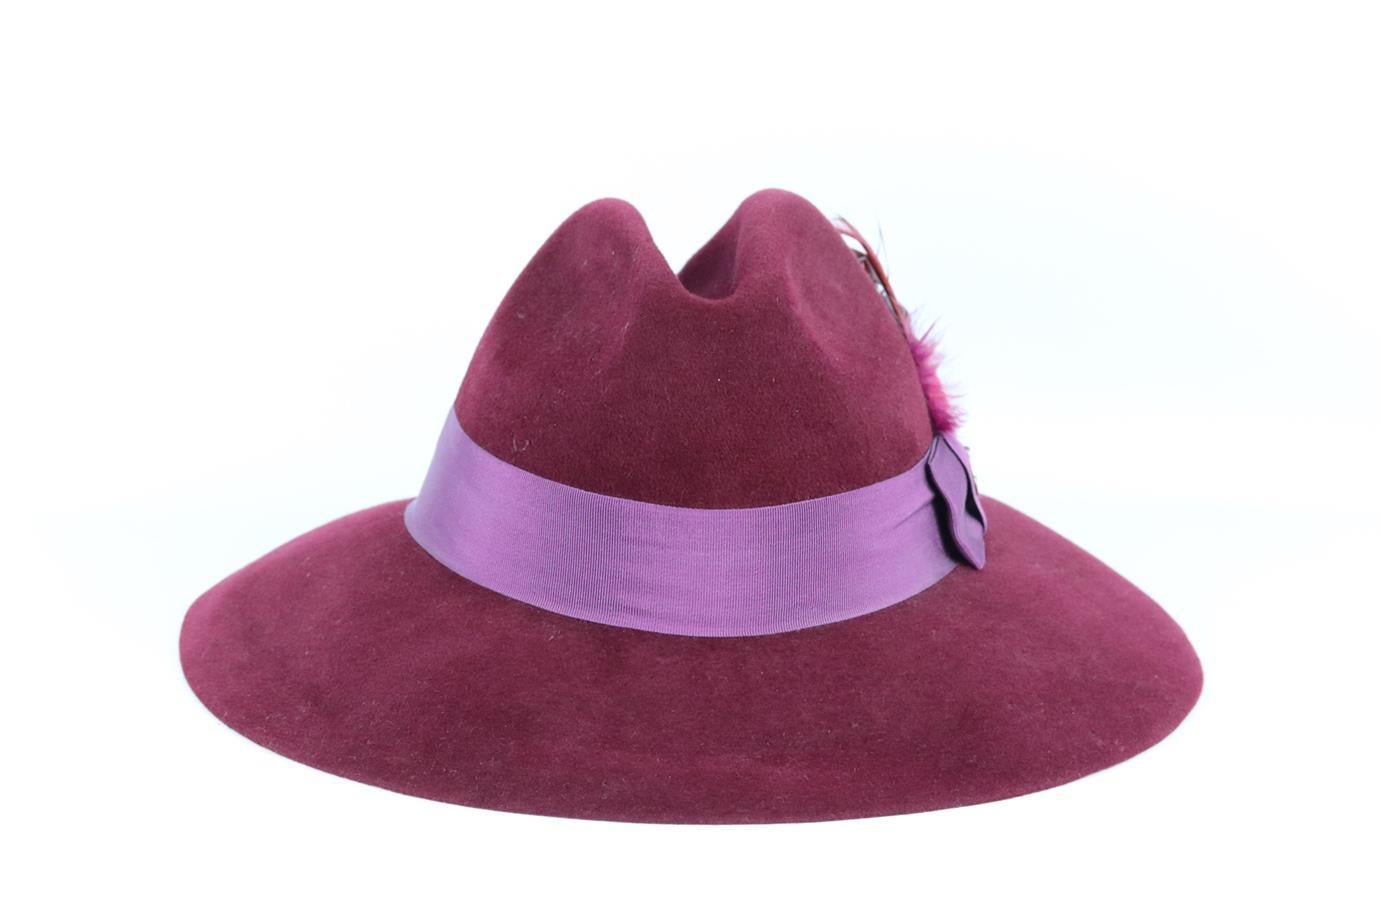 Gucci grosgrain trimmed rabbit felt fedora. Burgundy. Pull on. 100% Rabbit; trim: 56% cotton, 44% viscose. Does not come with dustbag or box. Size: Medium. Circumference: 23.6 in. Brim Width: 3.5 in. Very good condition - Light signs of wear; see